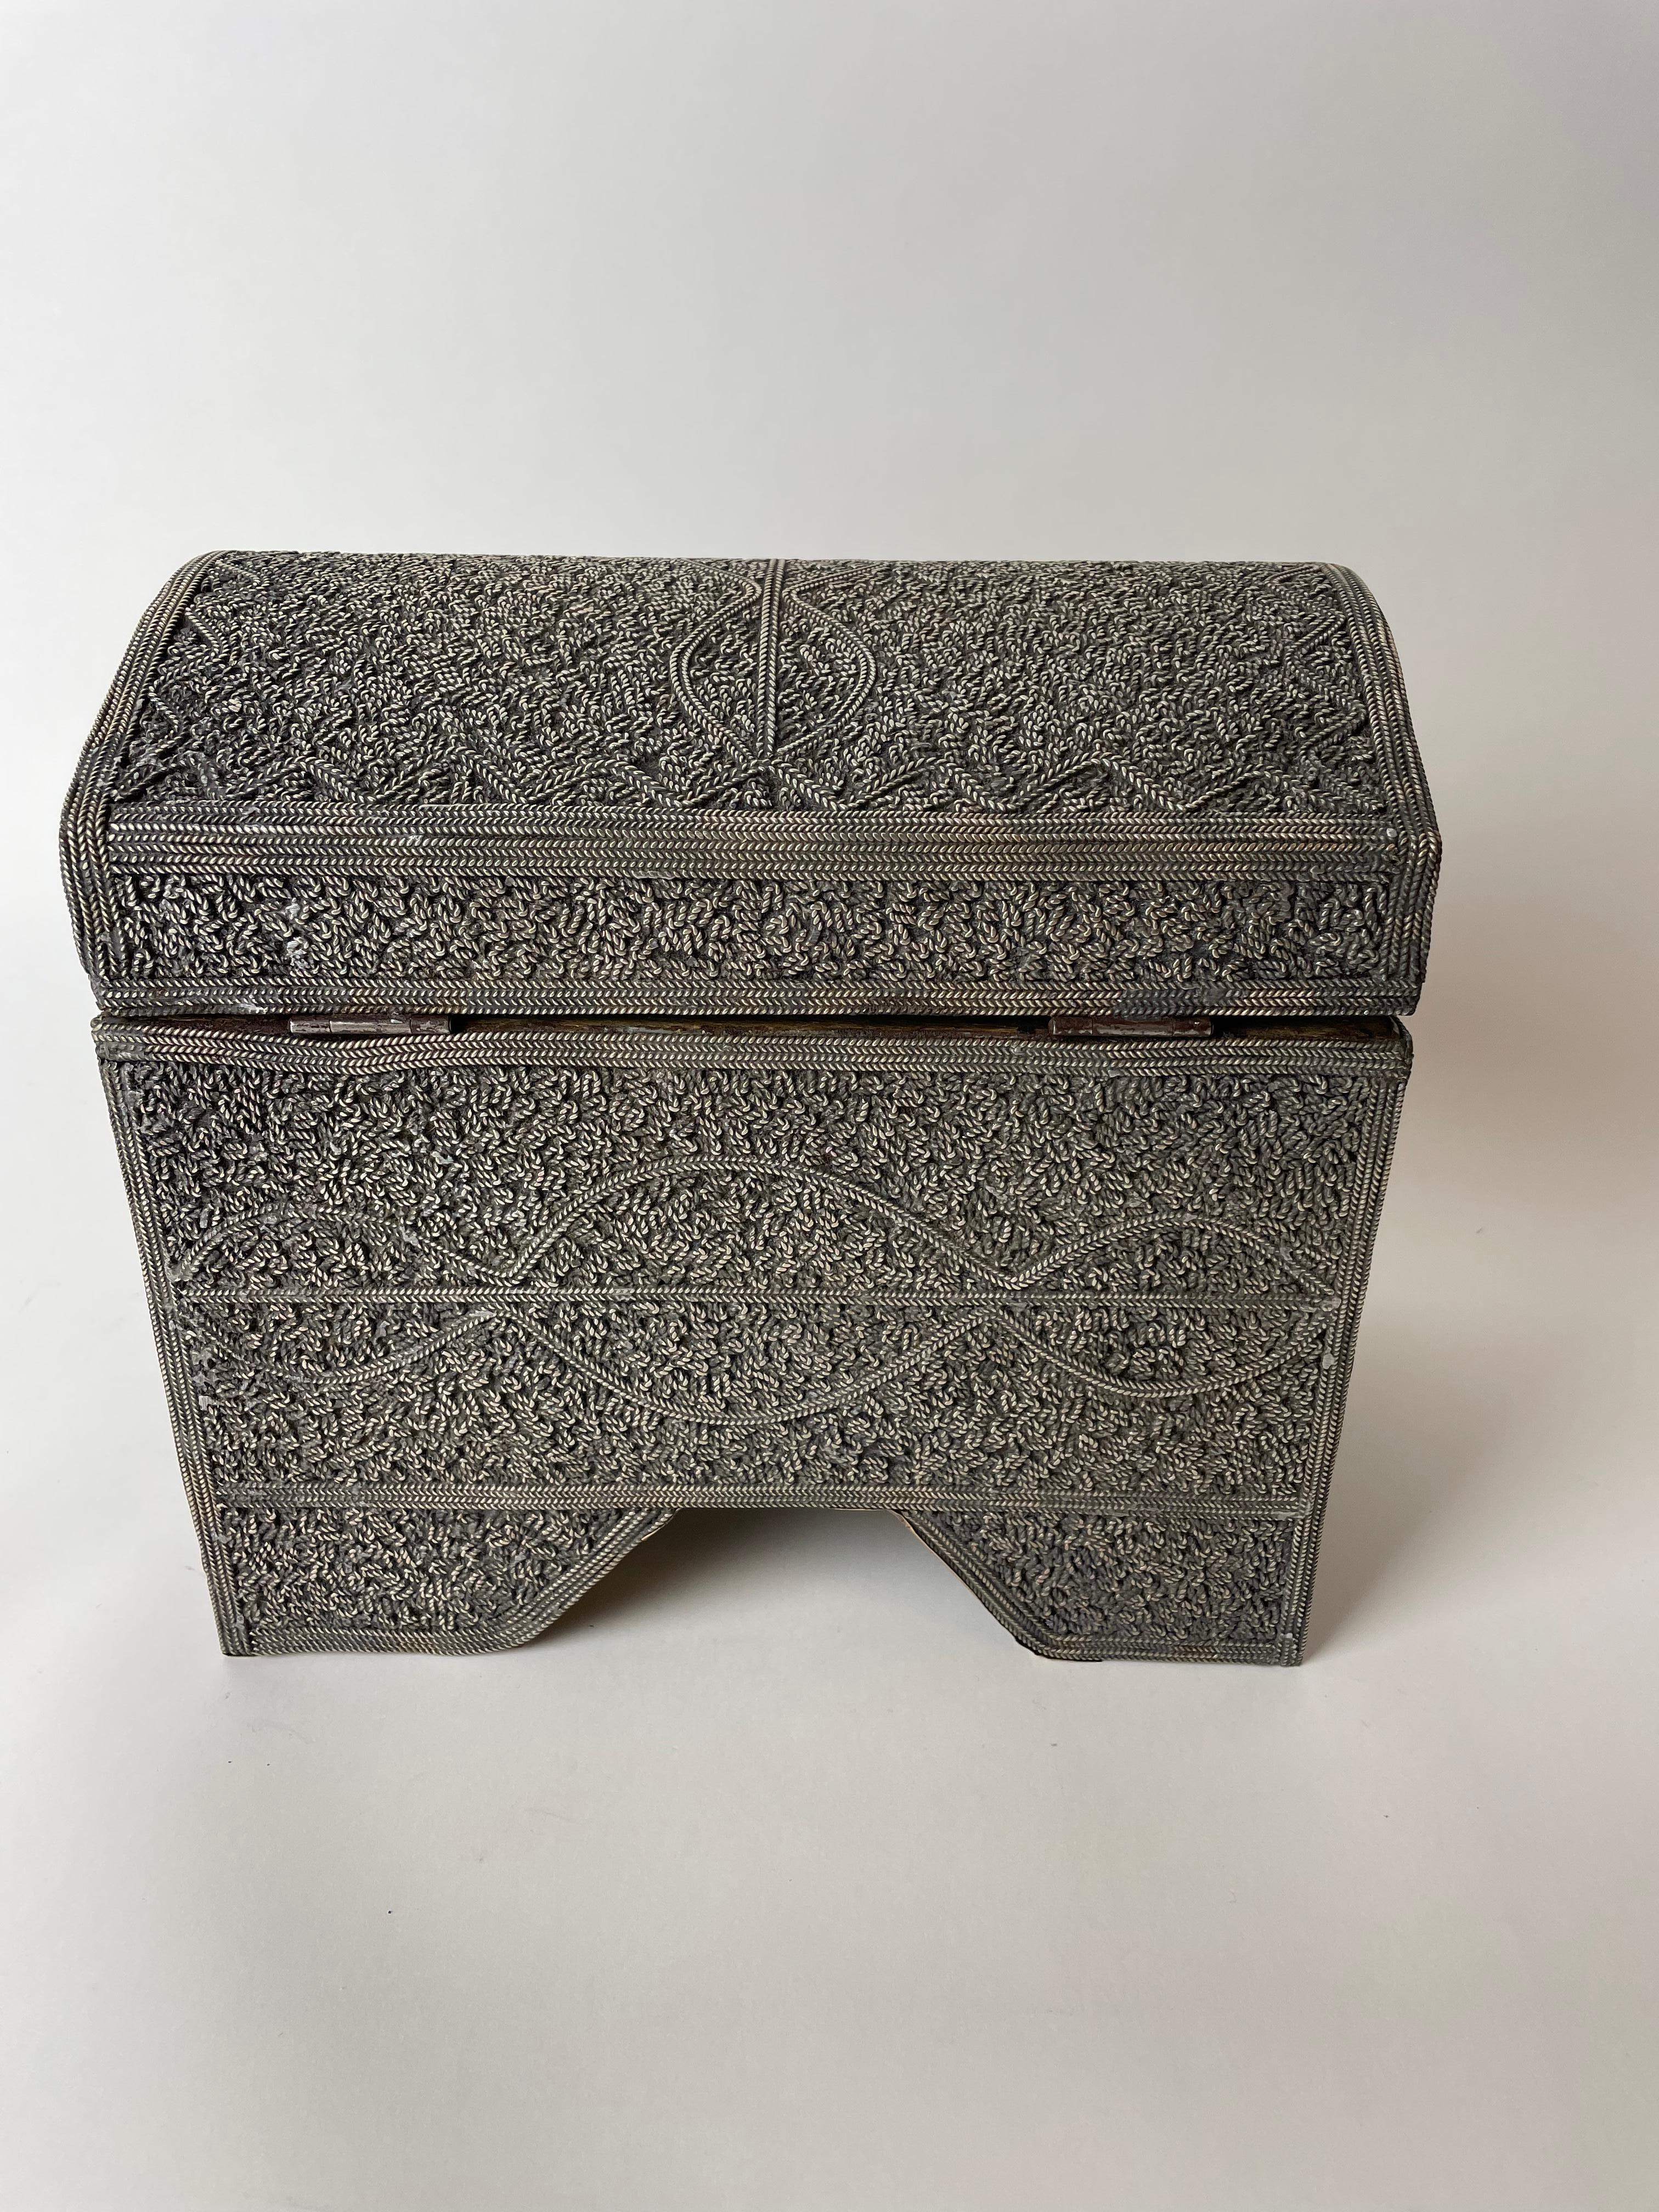 Beautiful North African Box Richly Decorated with Silver Wire, Late 19th Century For Sale 2